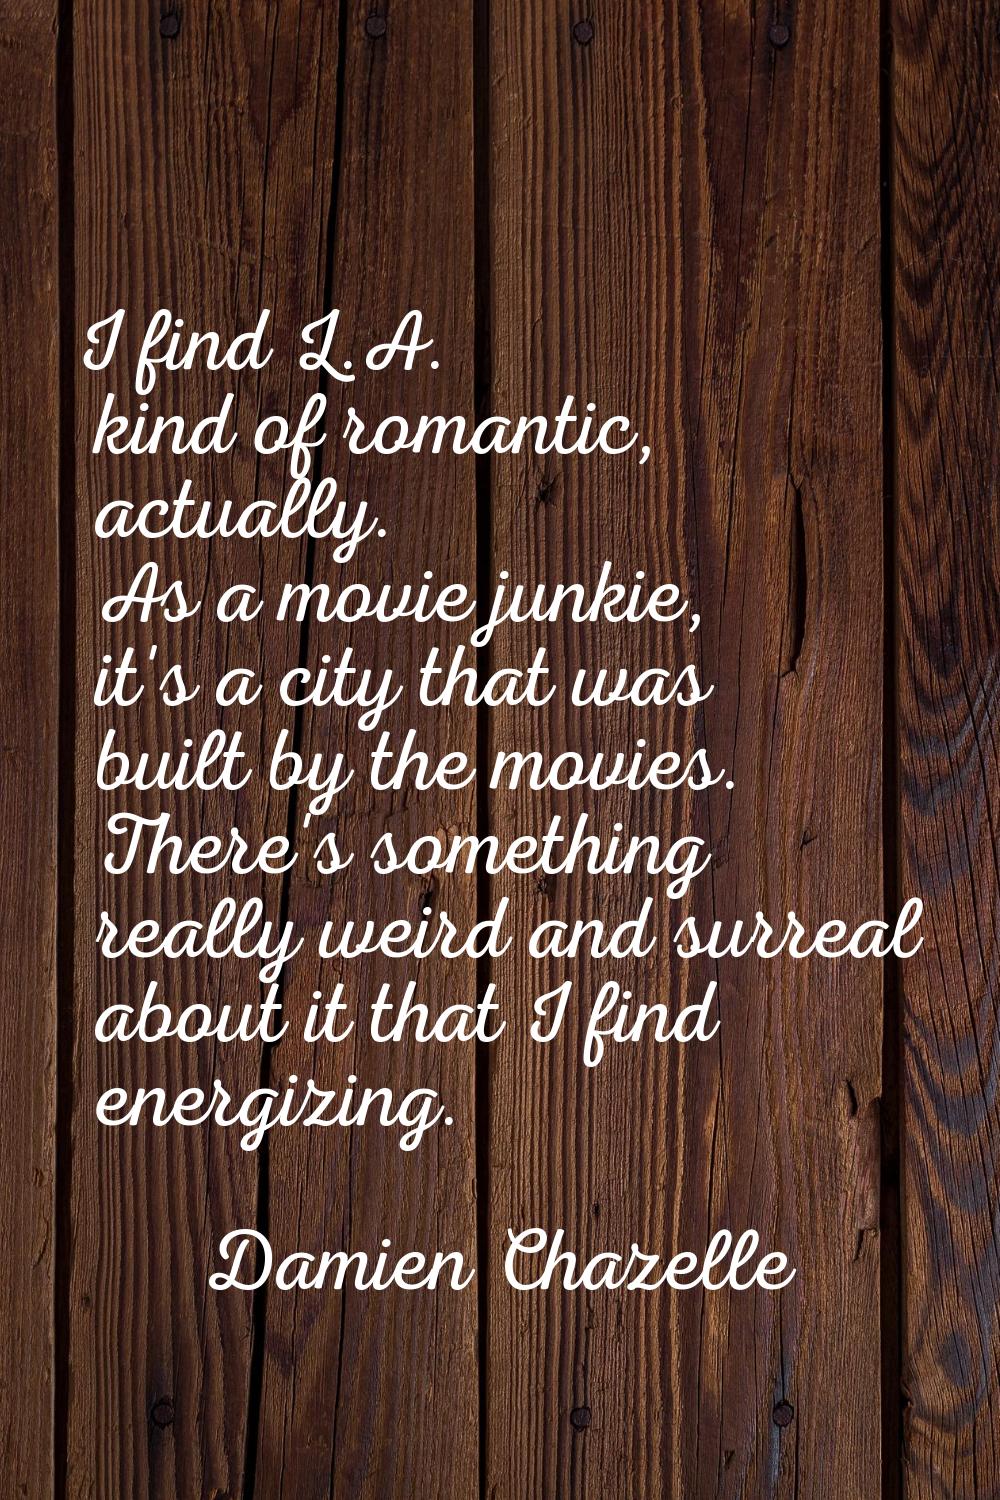 I find L.A. kind of romantic, actually. As a movie junkie, it's a city that was built by the movies